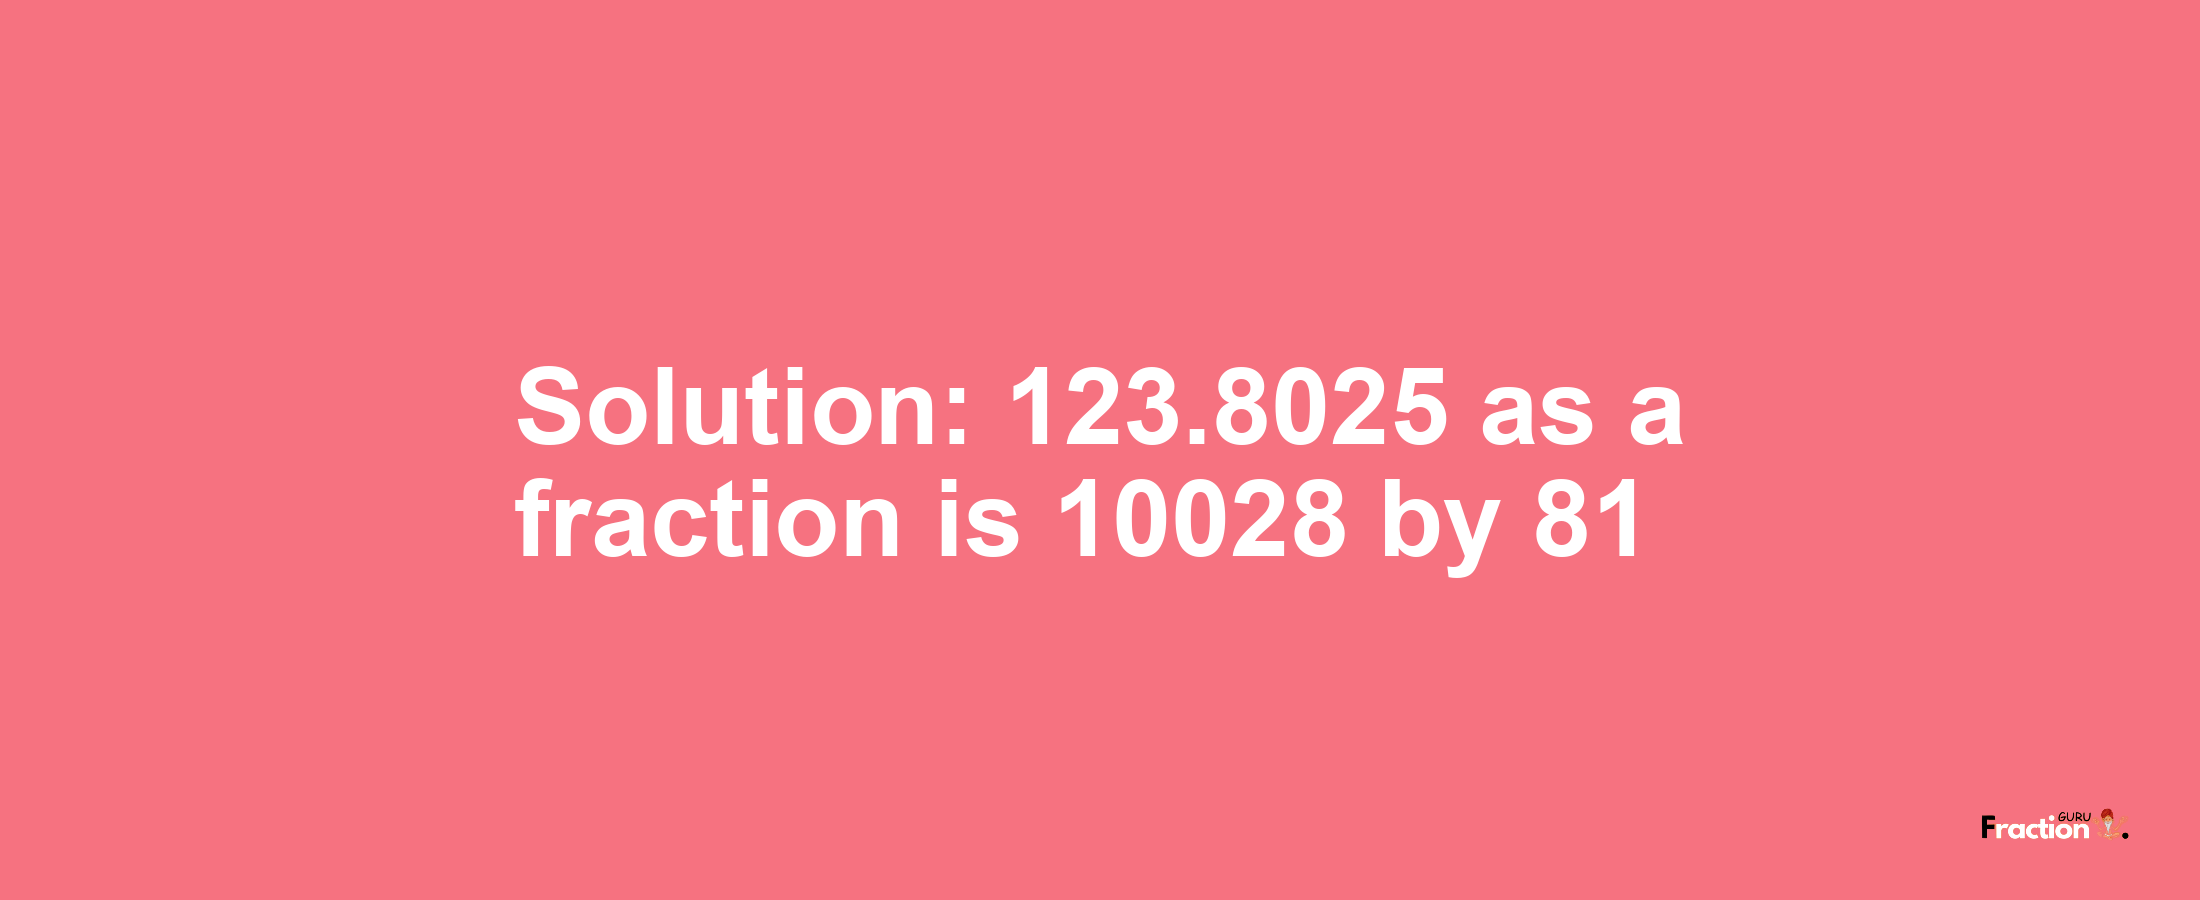 Solution:123.8025 as a fraction is 10028/81